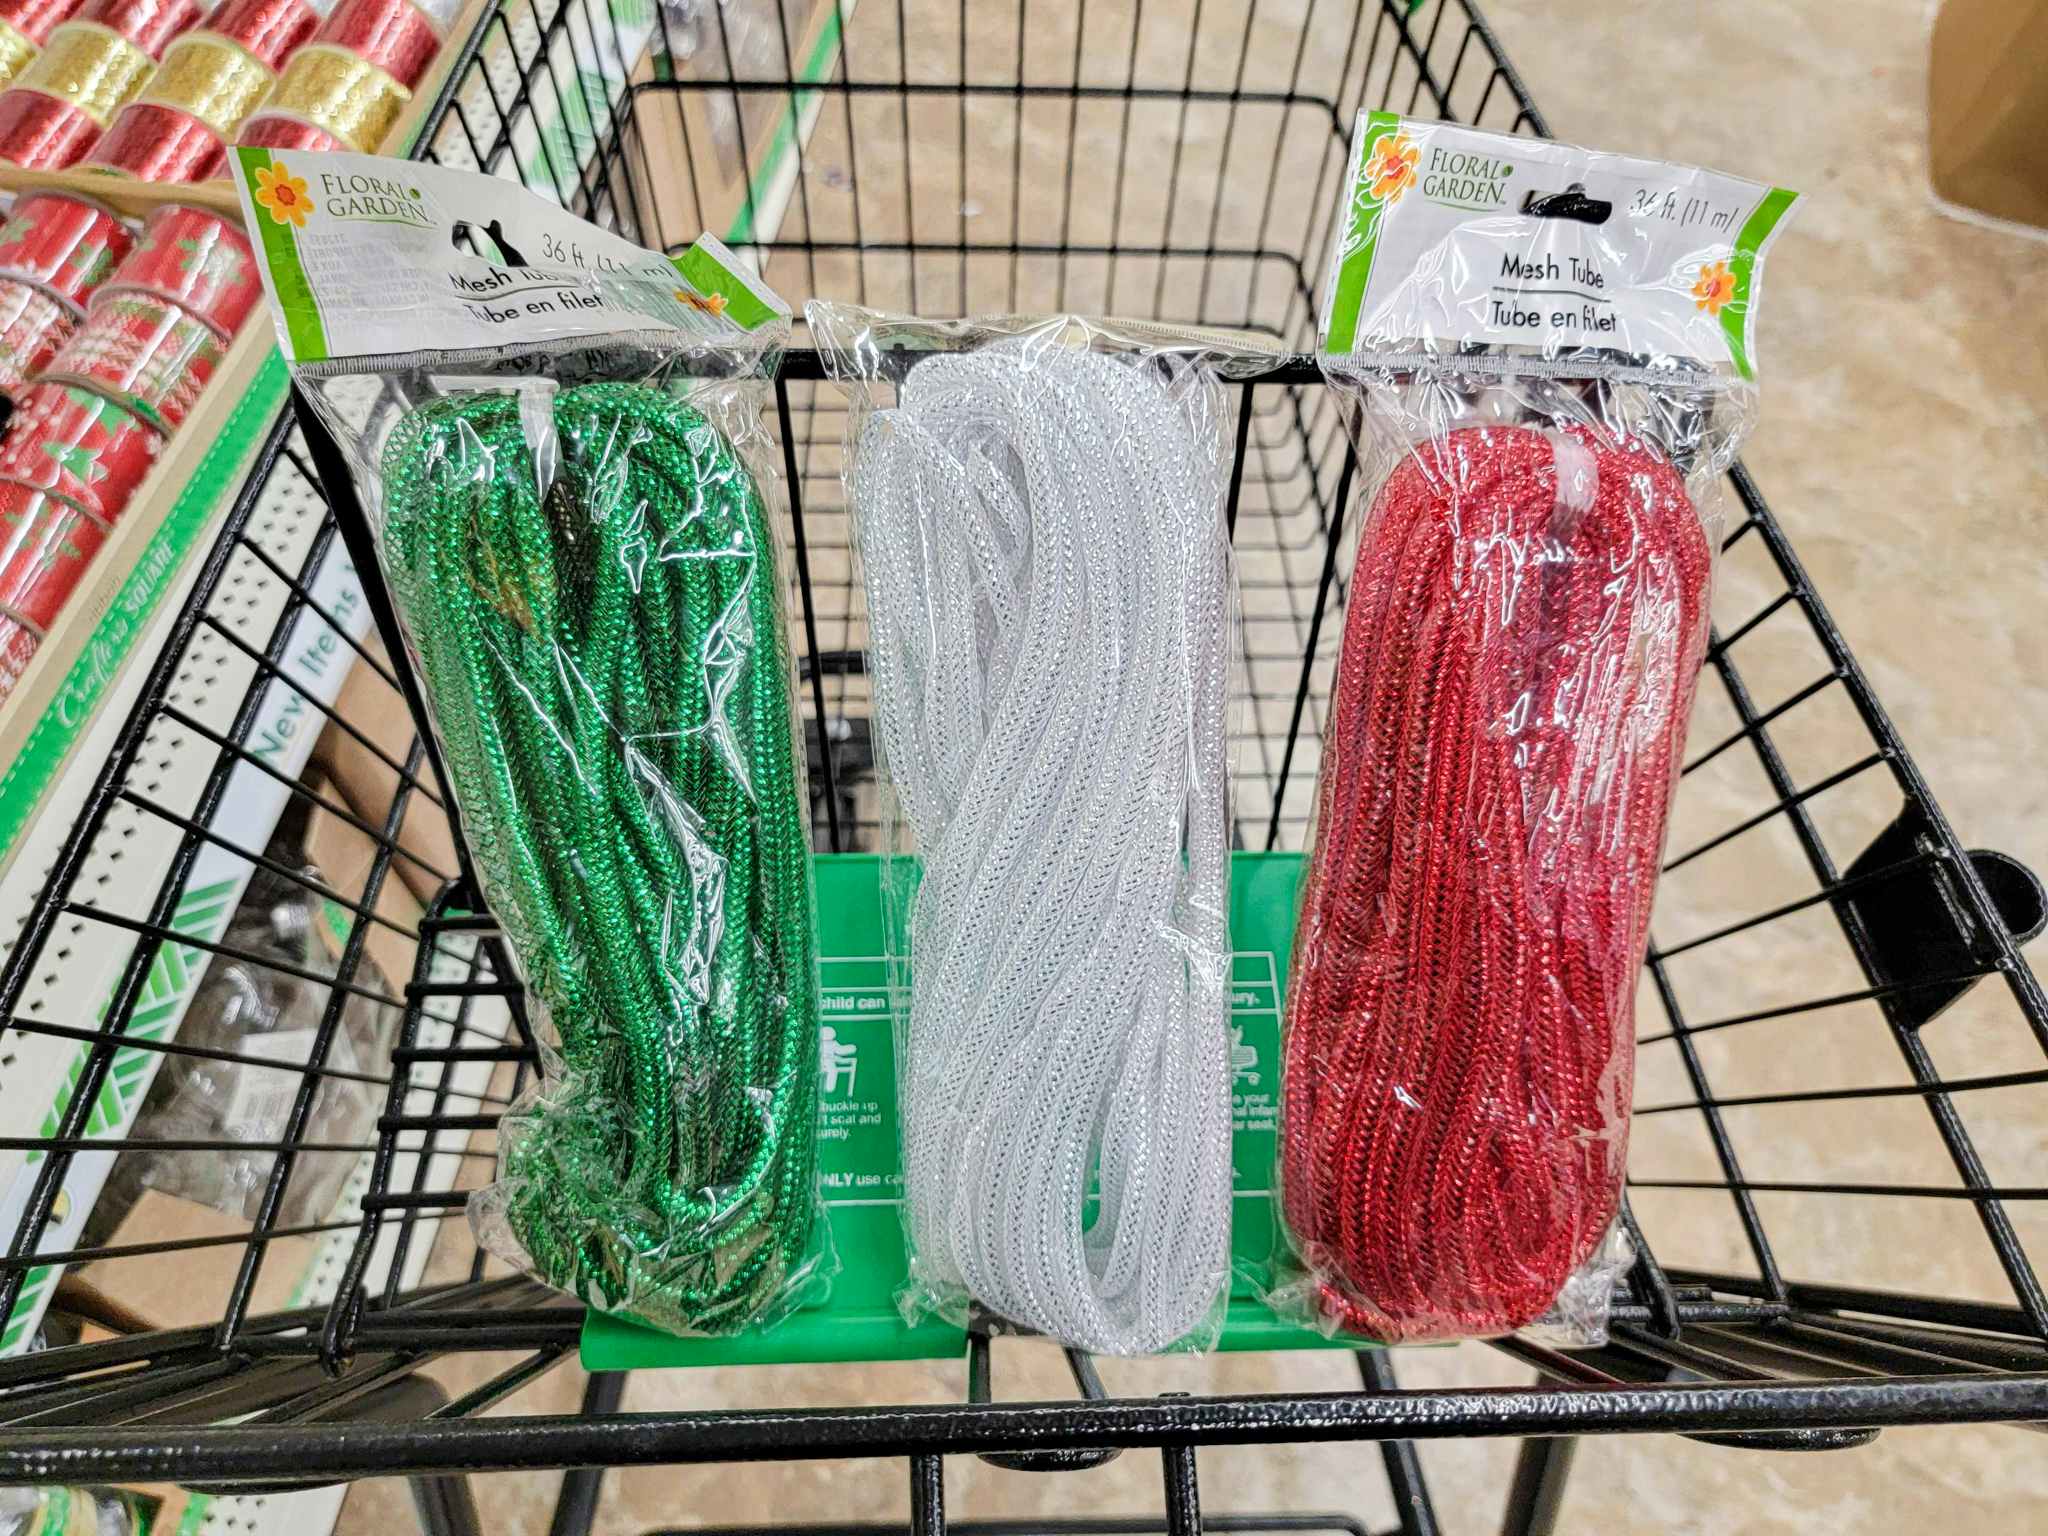 green, white, and red mesh tubing for crafts in a cart